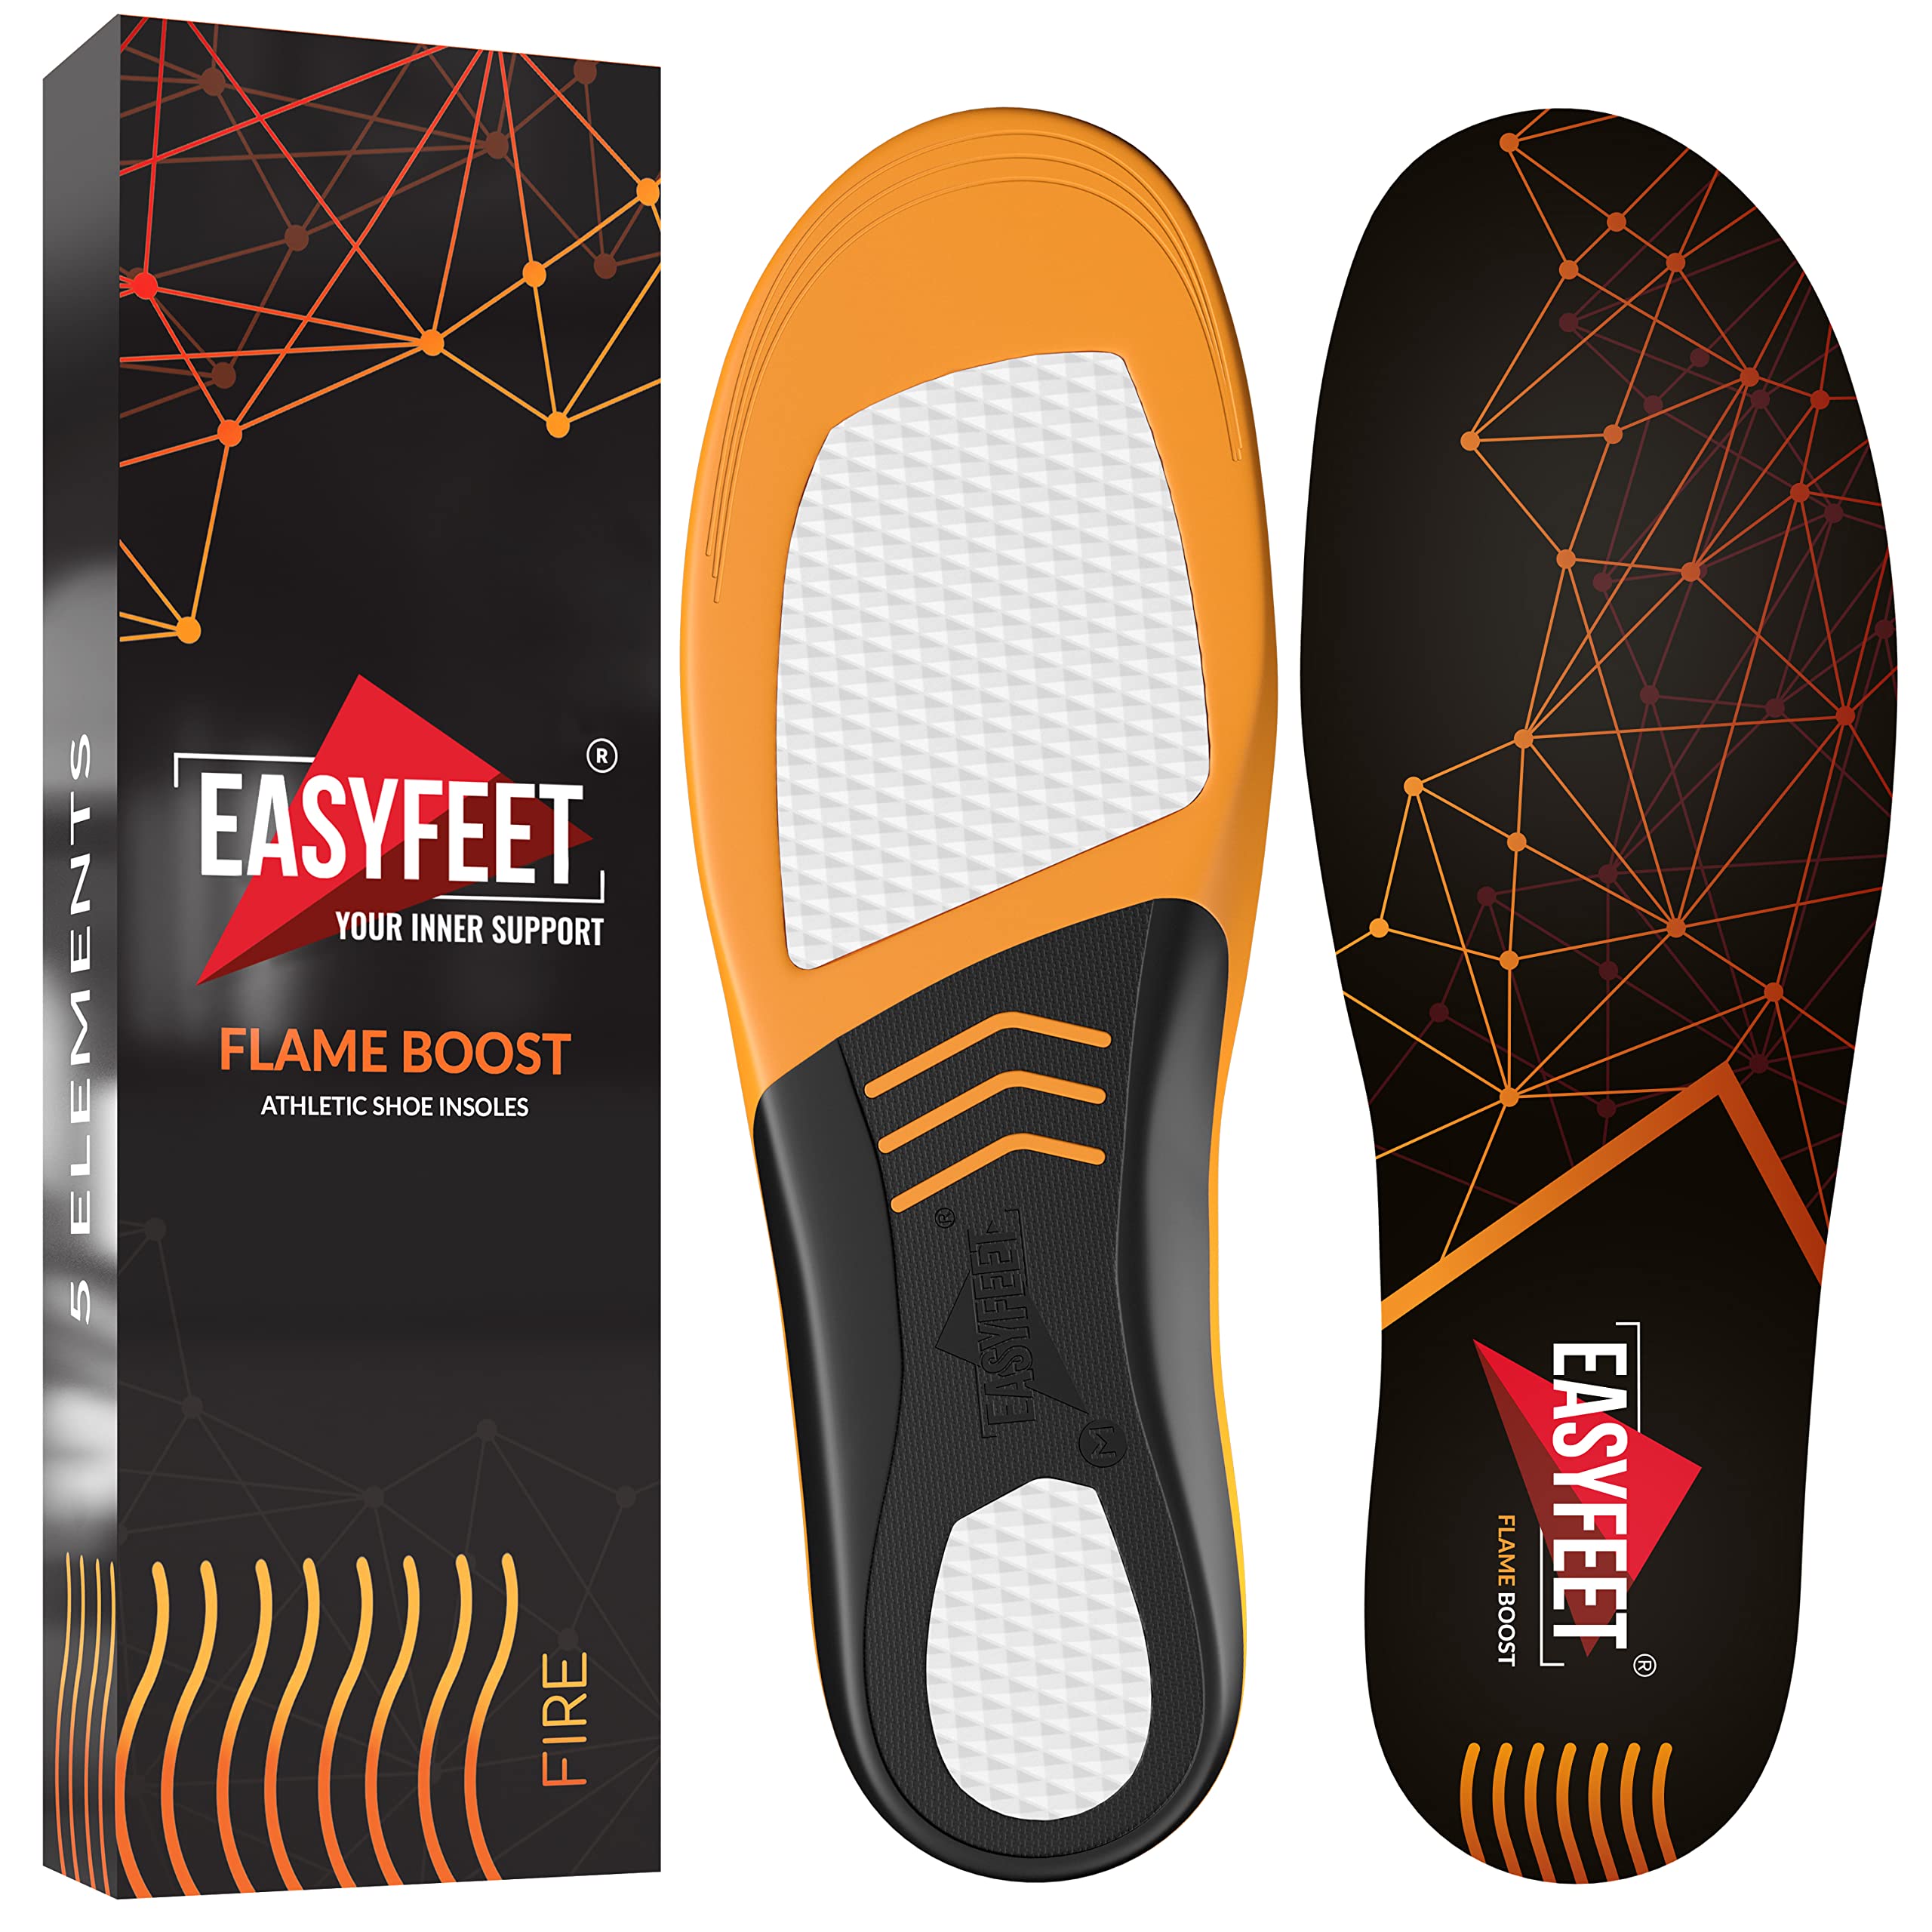 New 2022 Sport Shoe Insoles Men Women - Ideal for Active Sports Walking Running Training Hiking Hockey - Extra Shock Absorption Inserts - Orthotic Comfort Insoles for Sneakers Running Shoes Black M (Men 9-10.5/W